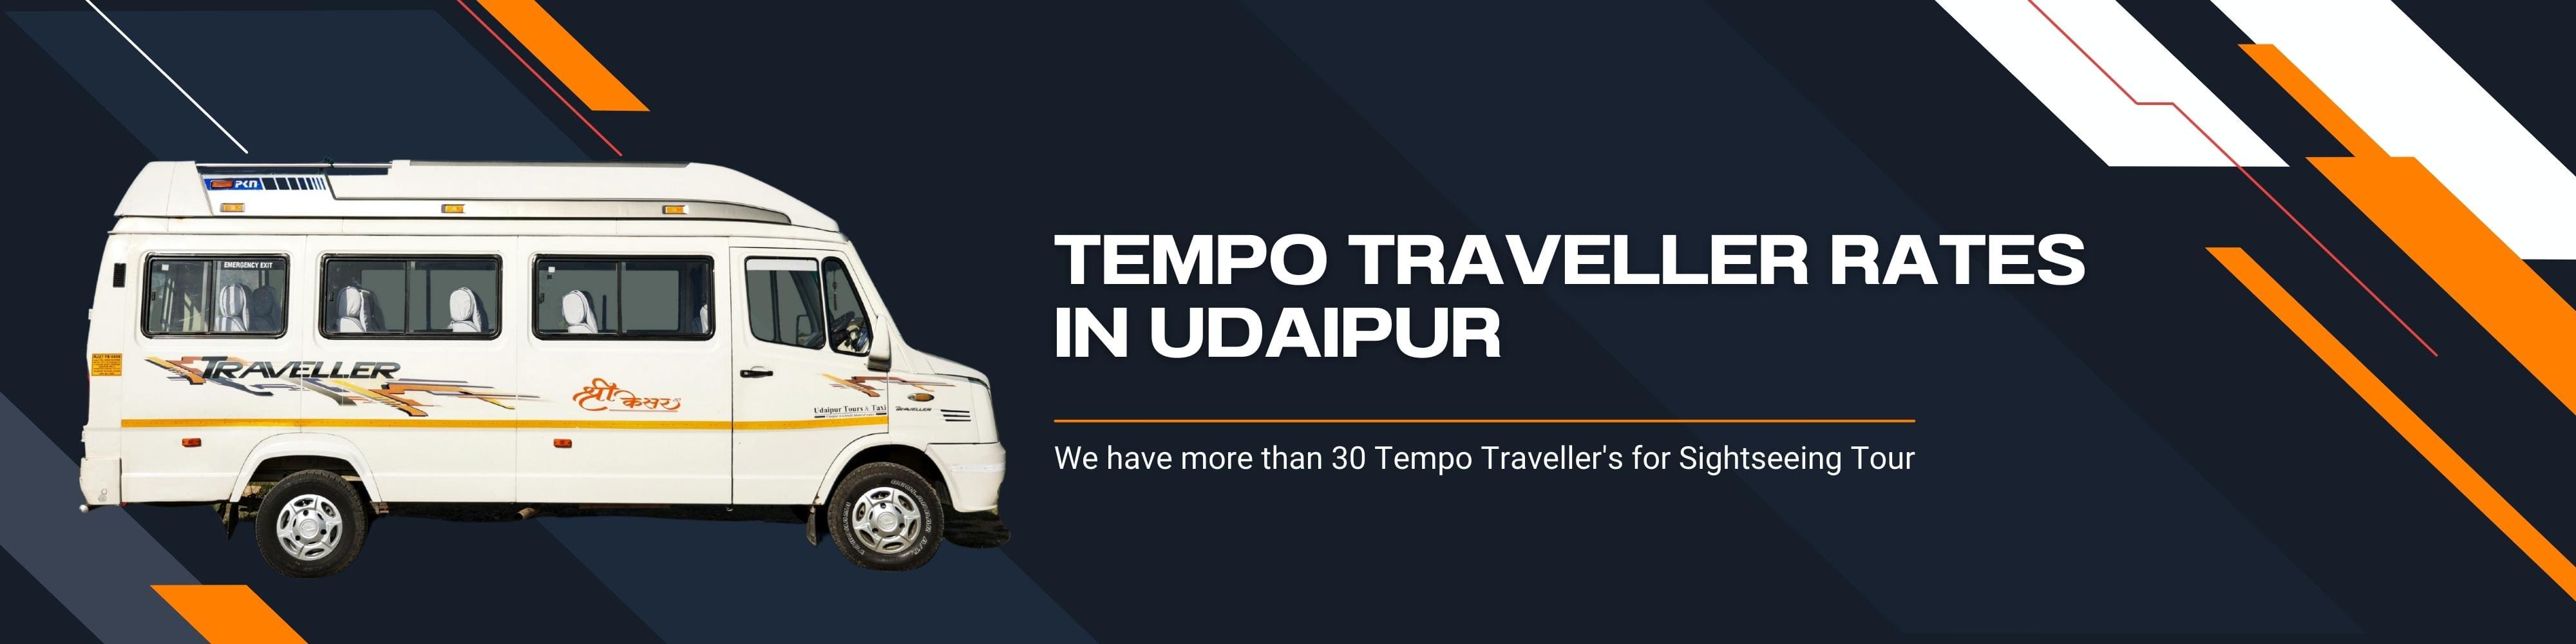 Tempo Traveller Rates